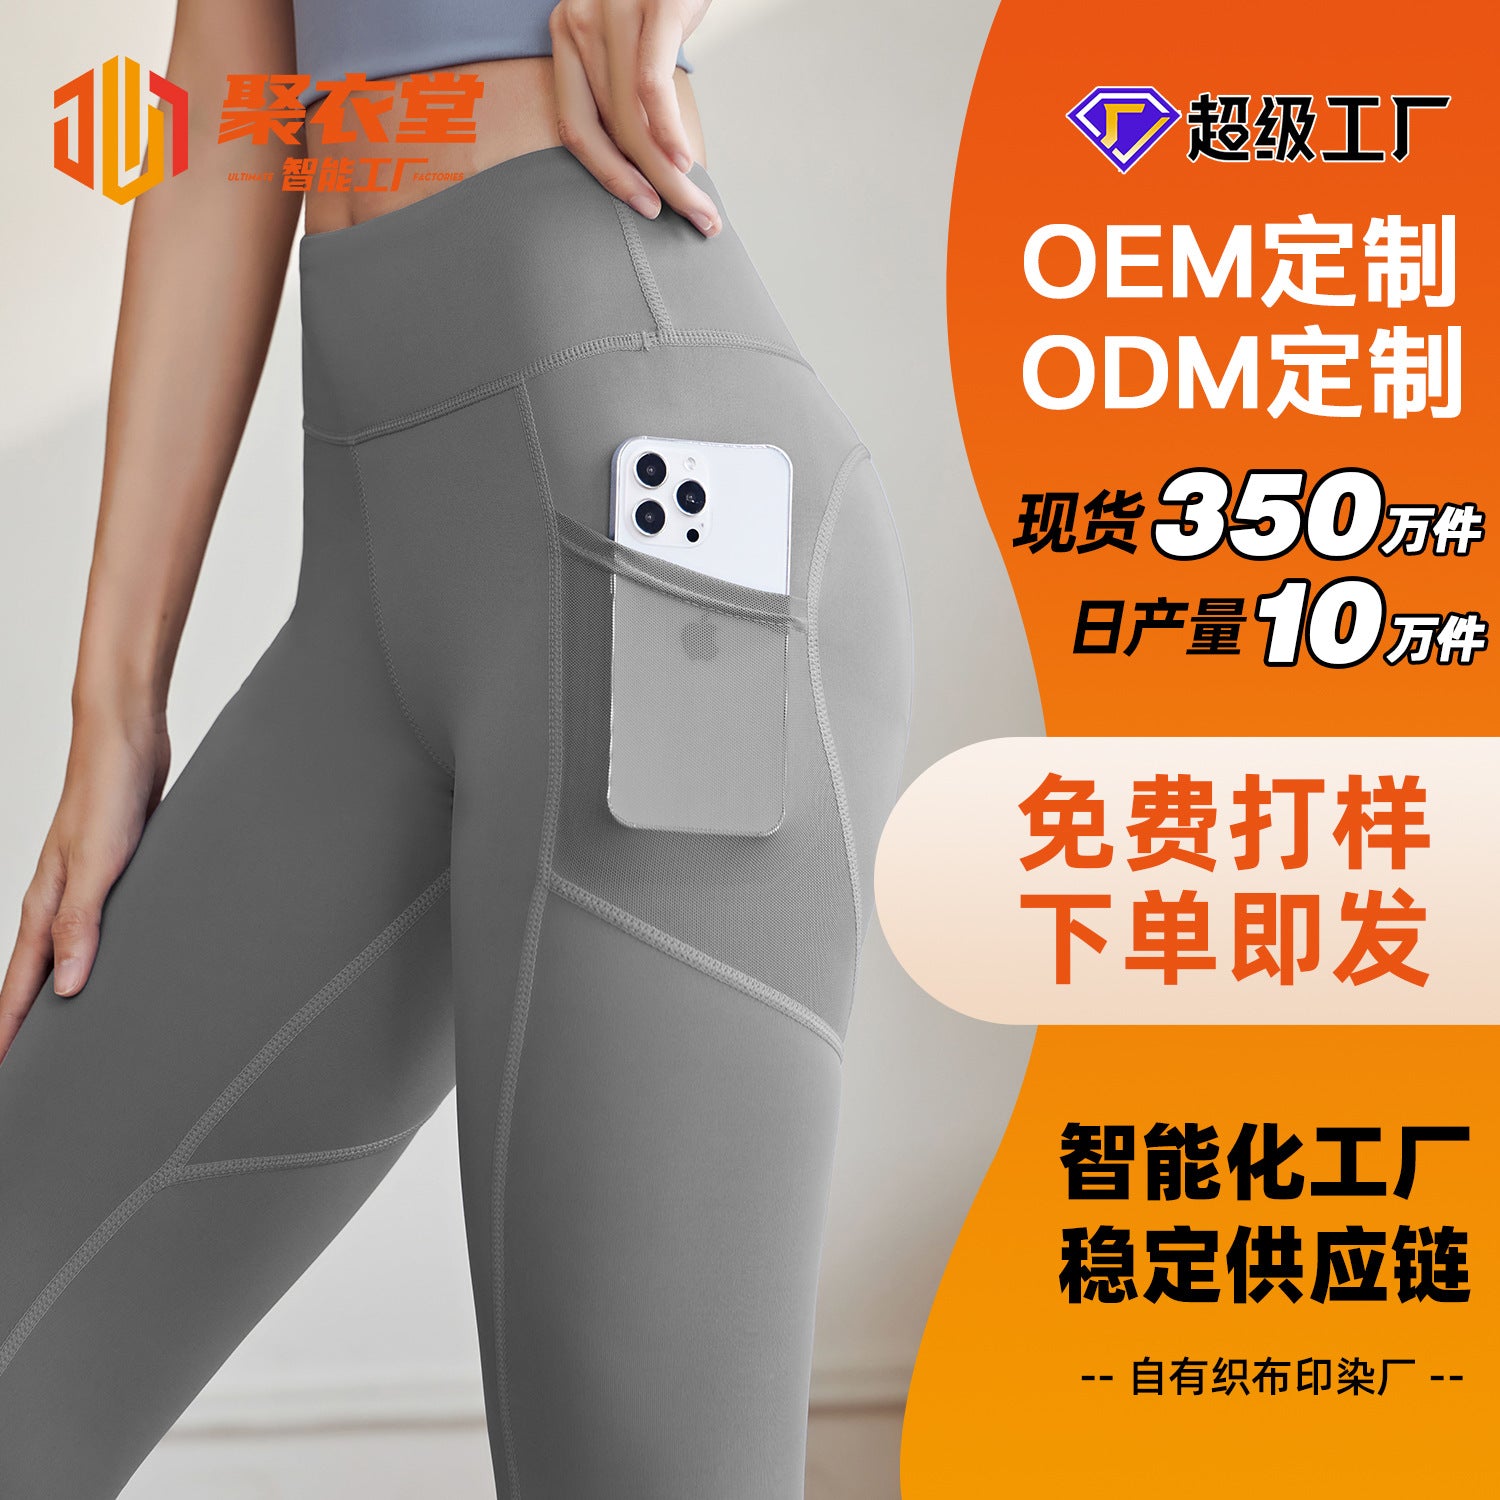 Processing customization, drawing proofing, OEM logo, source factory, peach mesh, side pockets, hip lifting yoga pants